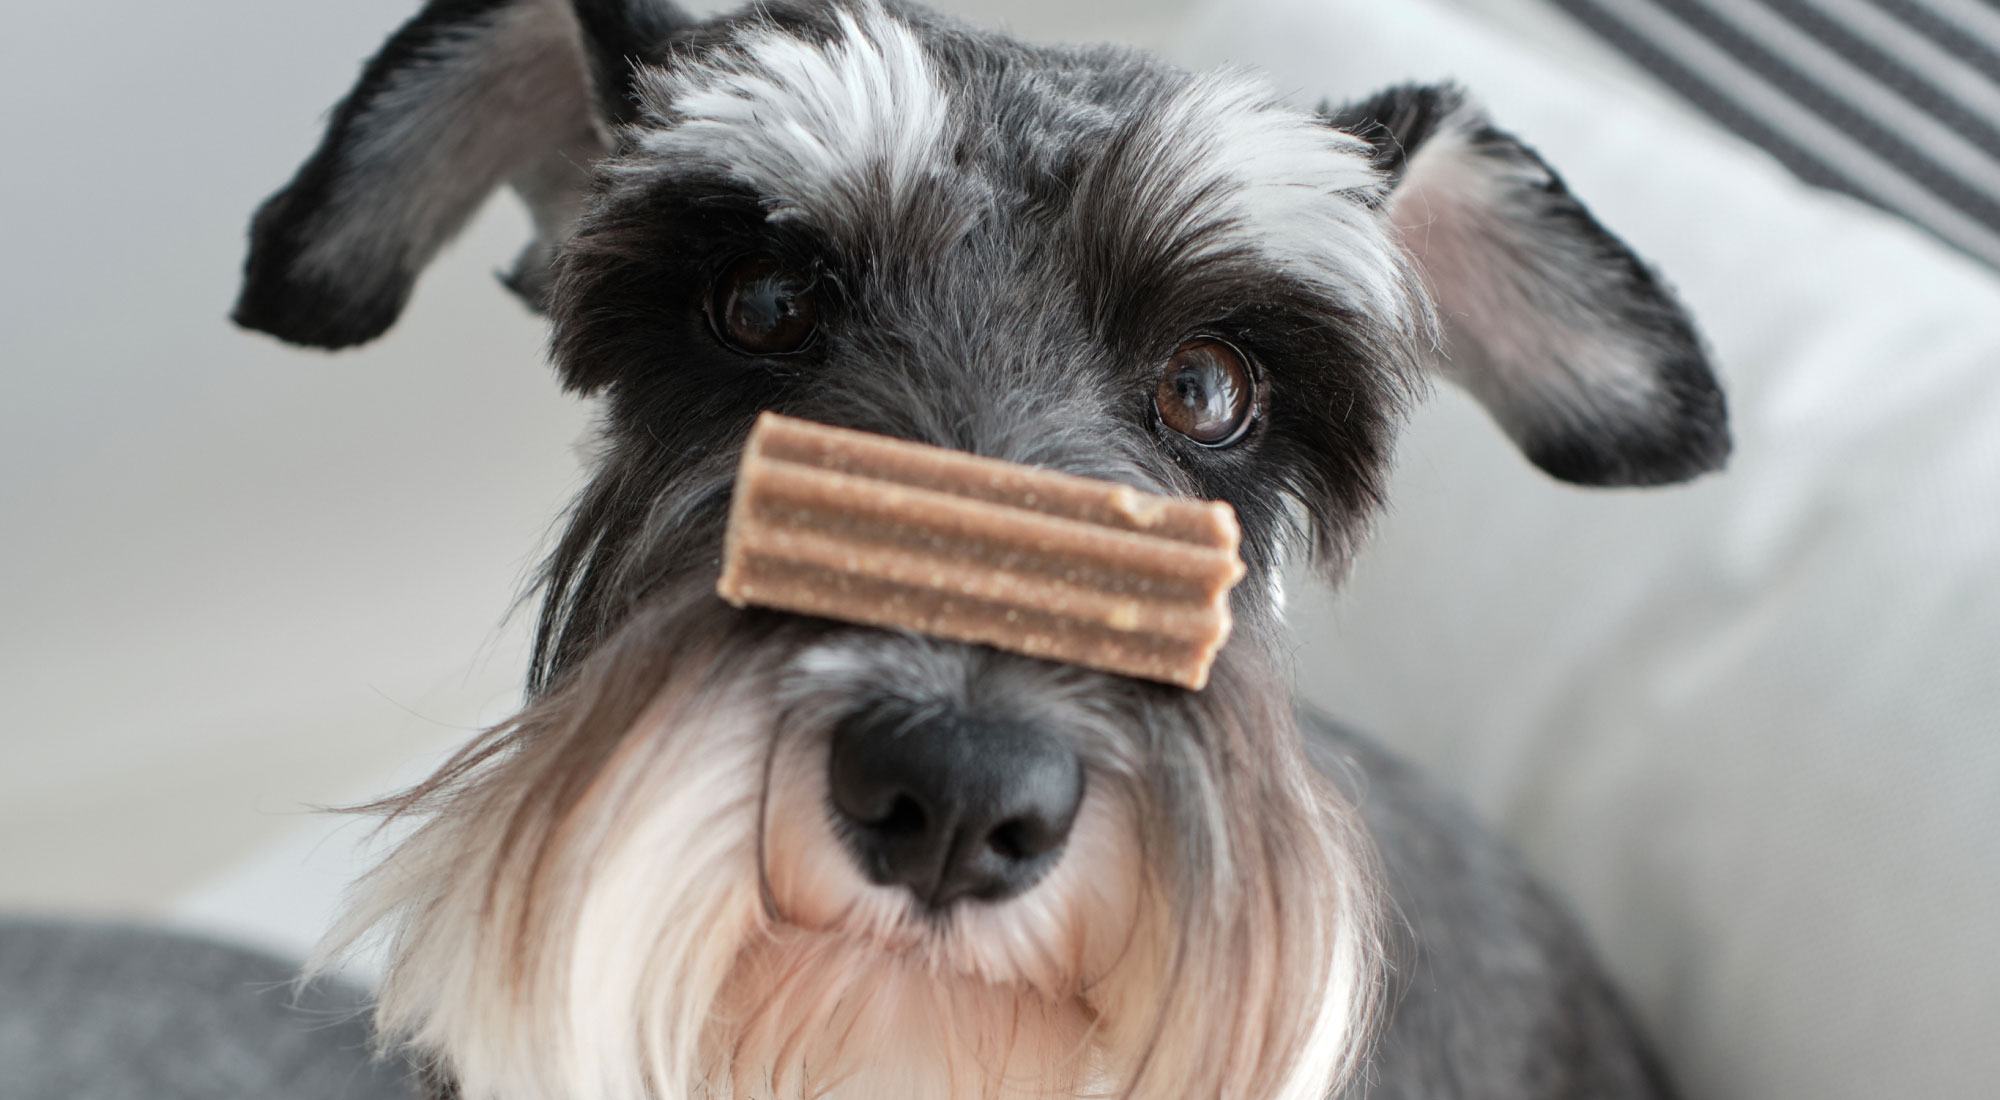 Dog balancing a dental chew on their nose